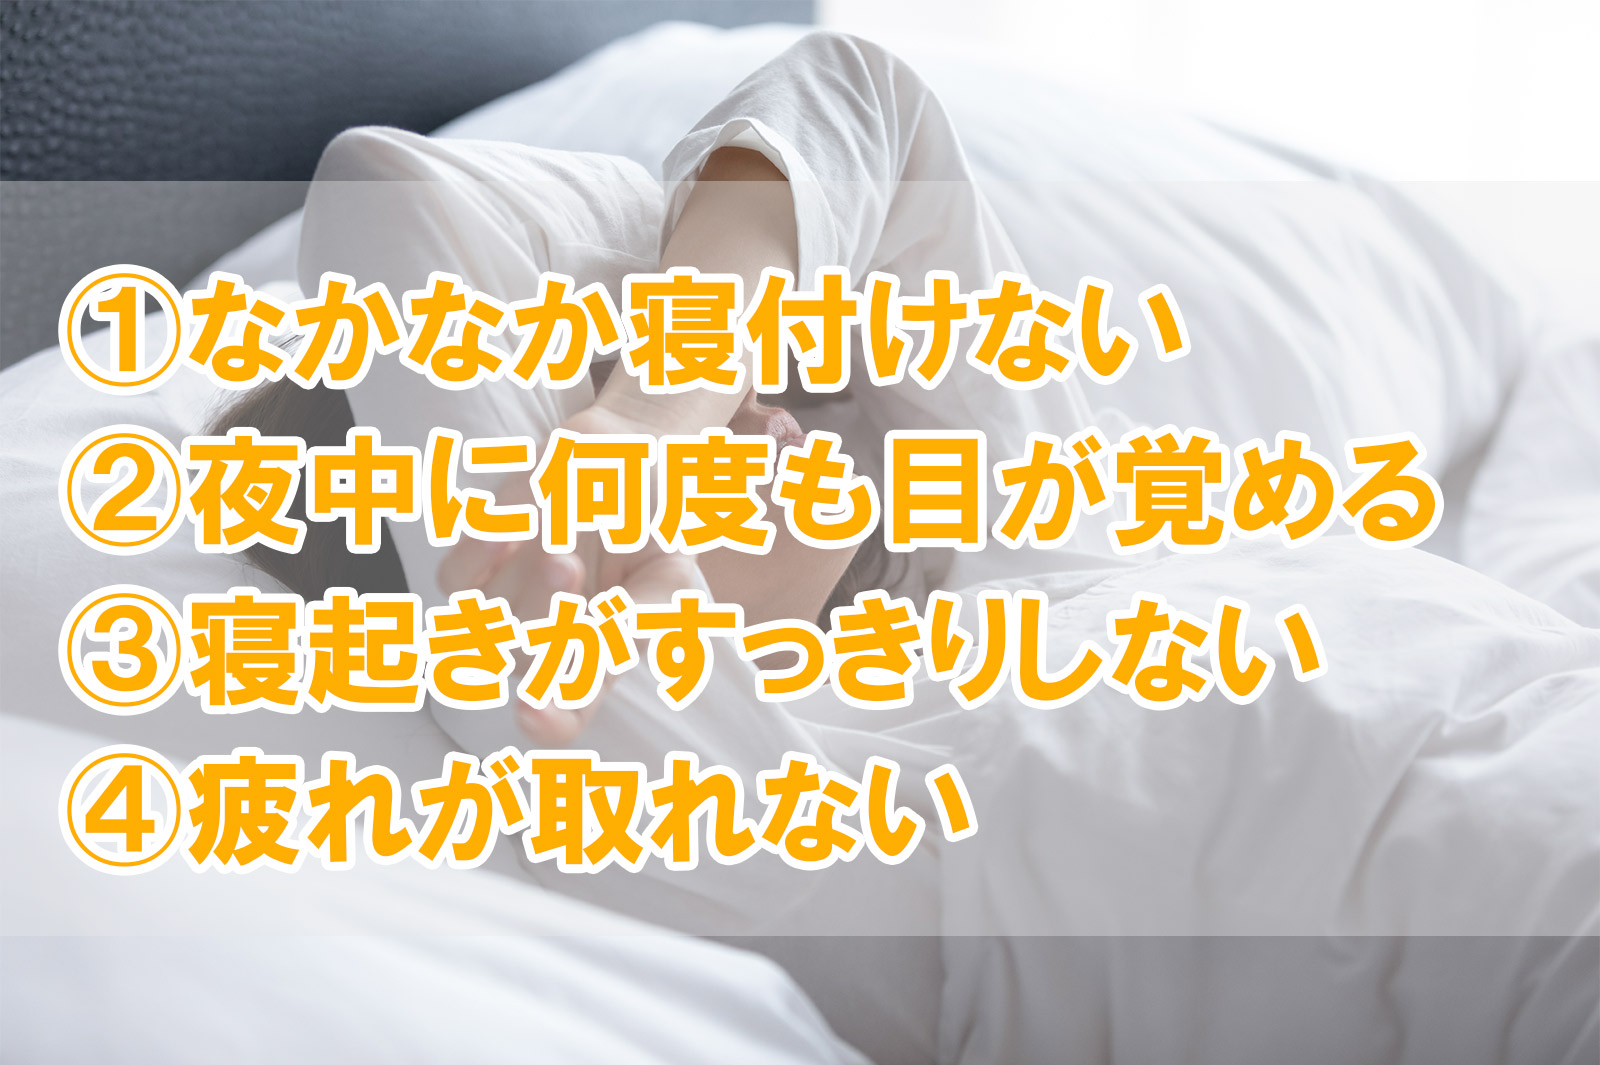 Bon Sommeil ぐっすり快適ﾊﾟｼﾞｬﾏ